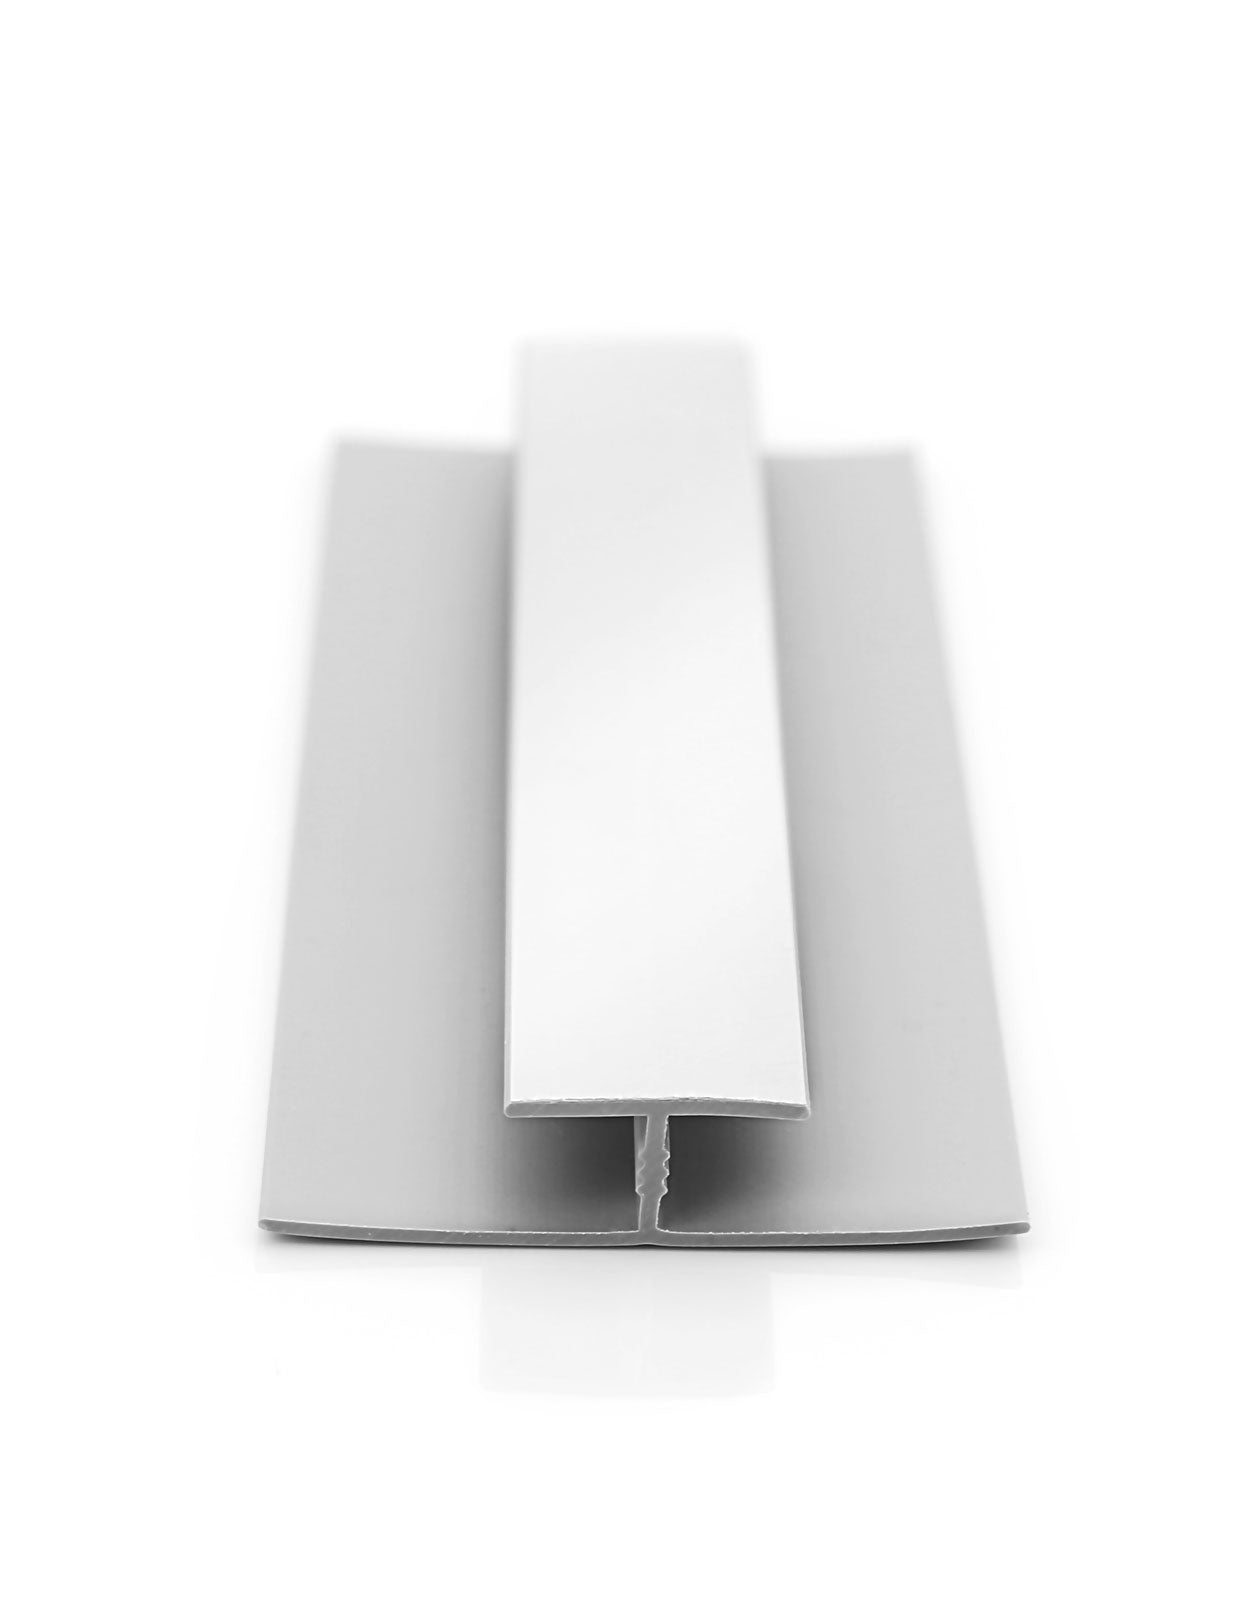 H Joint White Cladding Trim 2400mm x 10mm